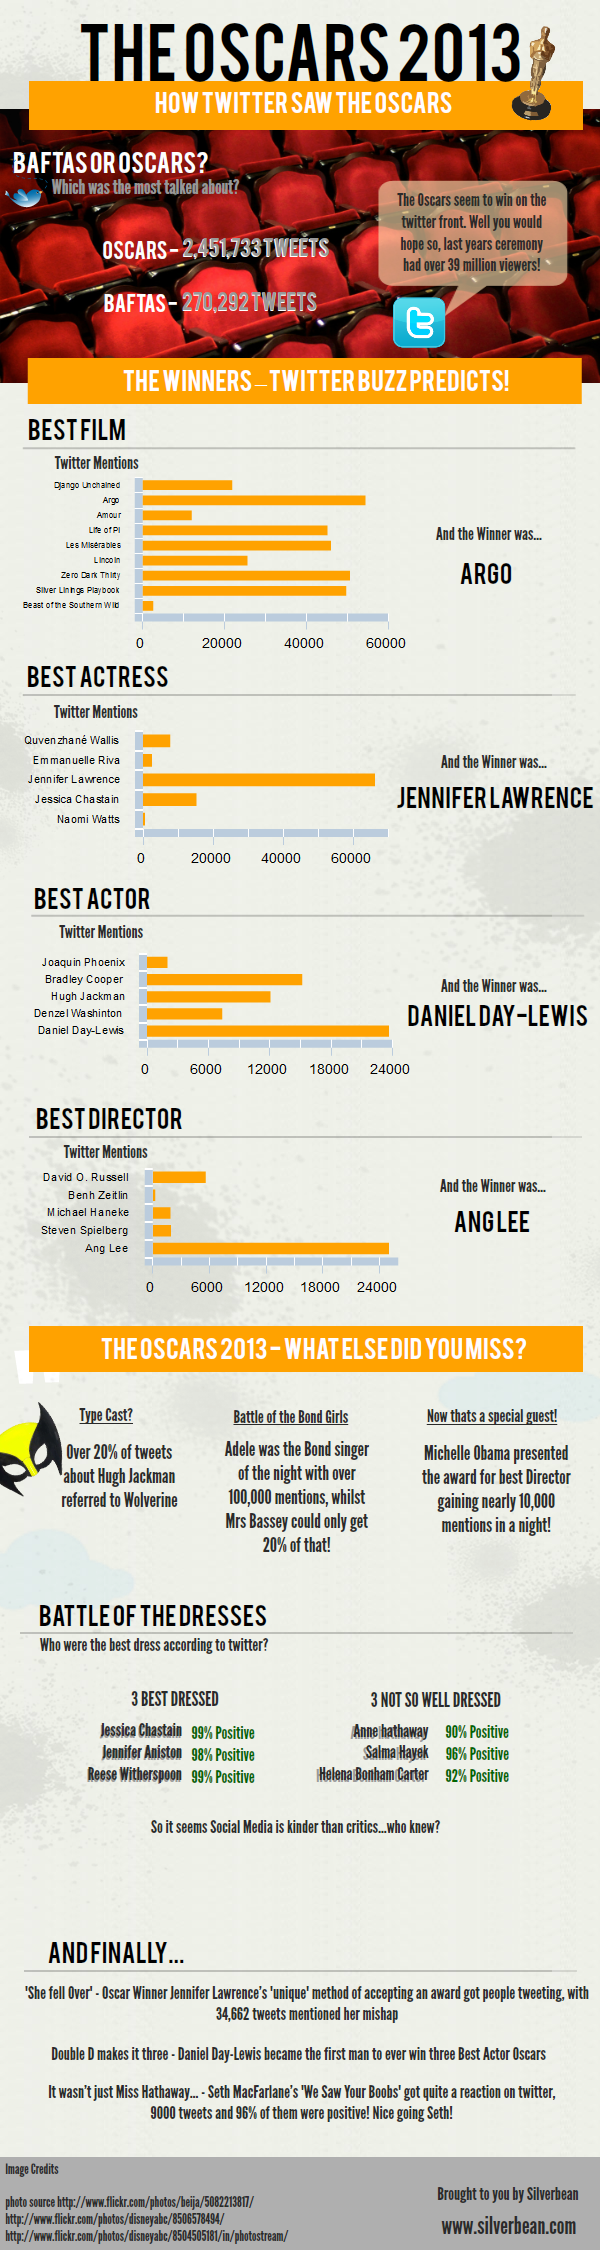 How Twitter Saw The Oscars 2013